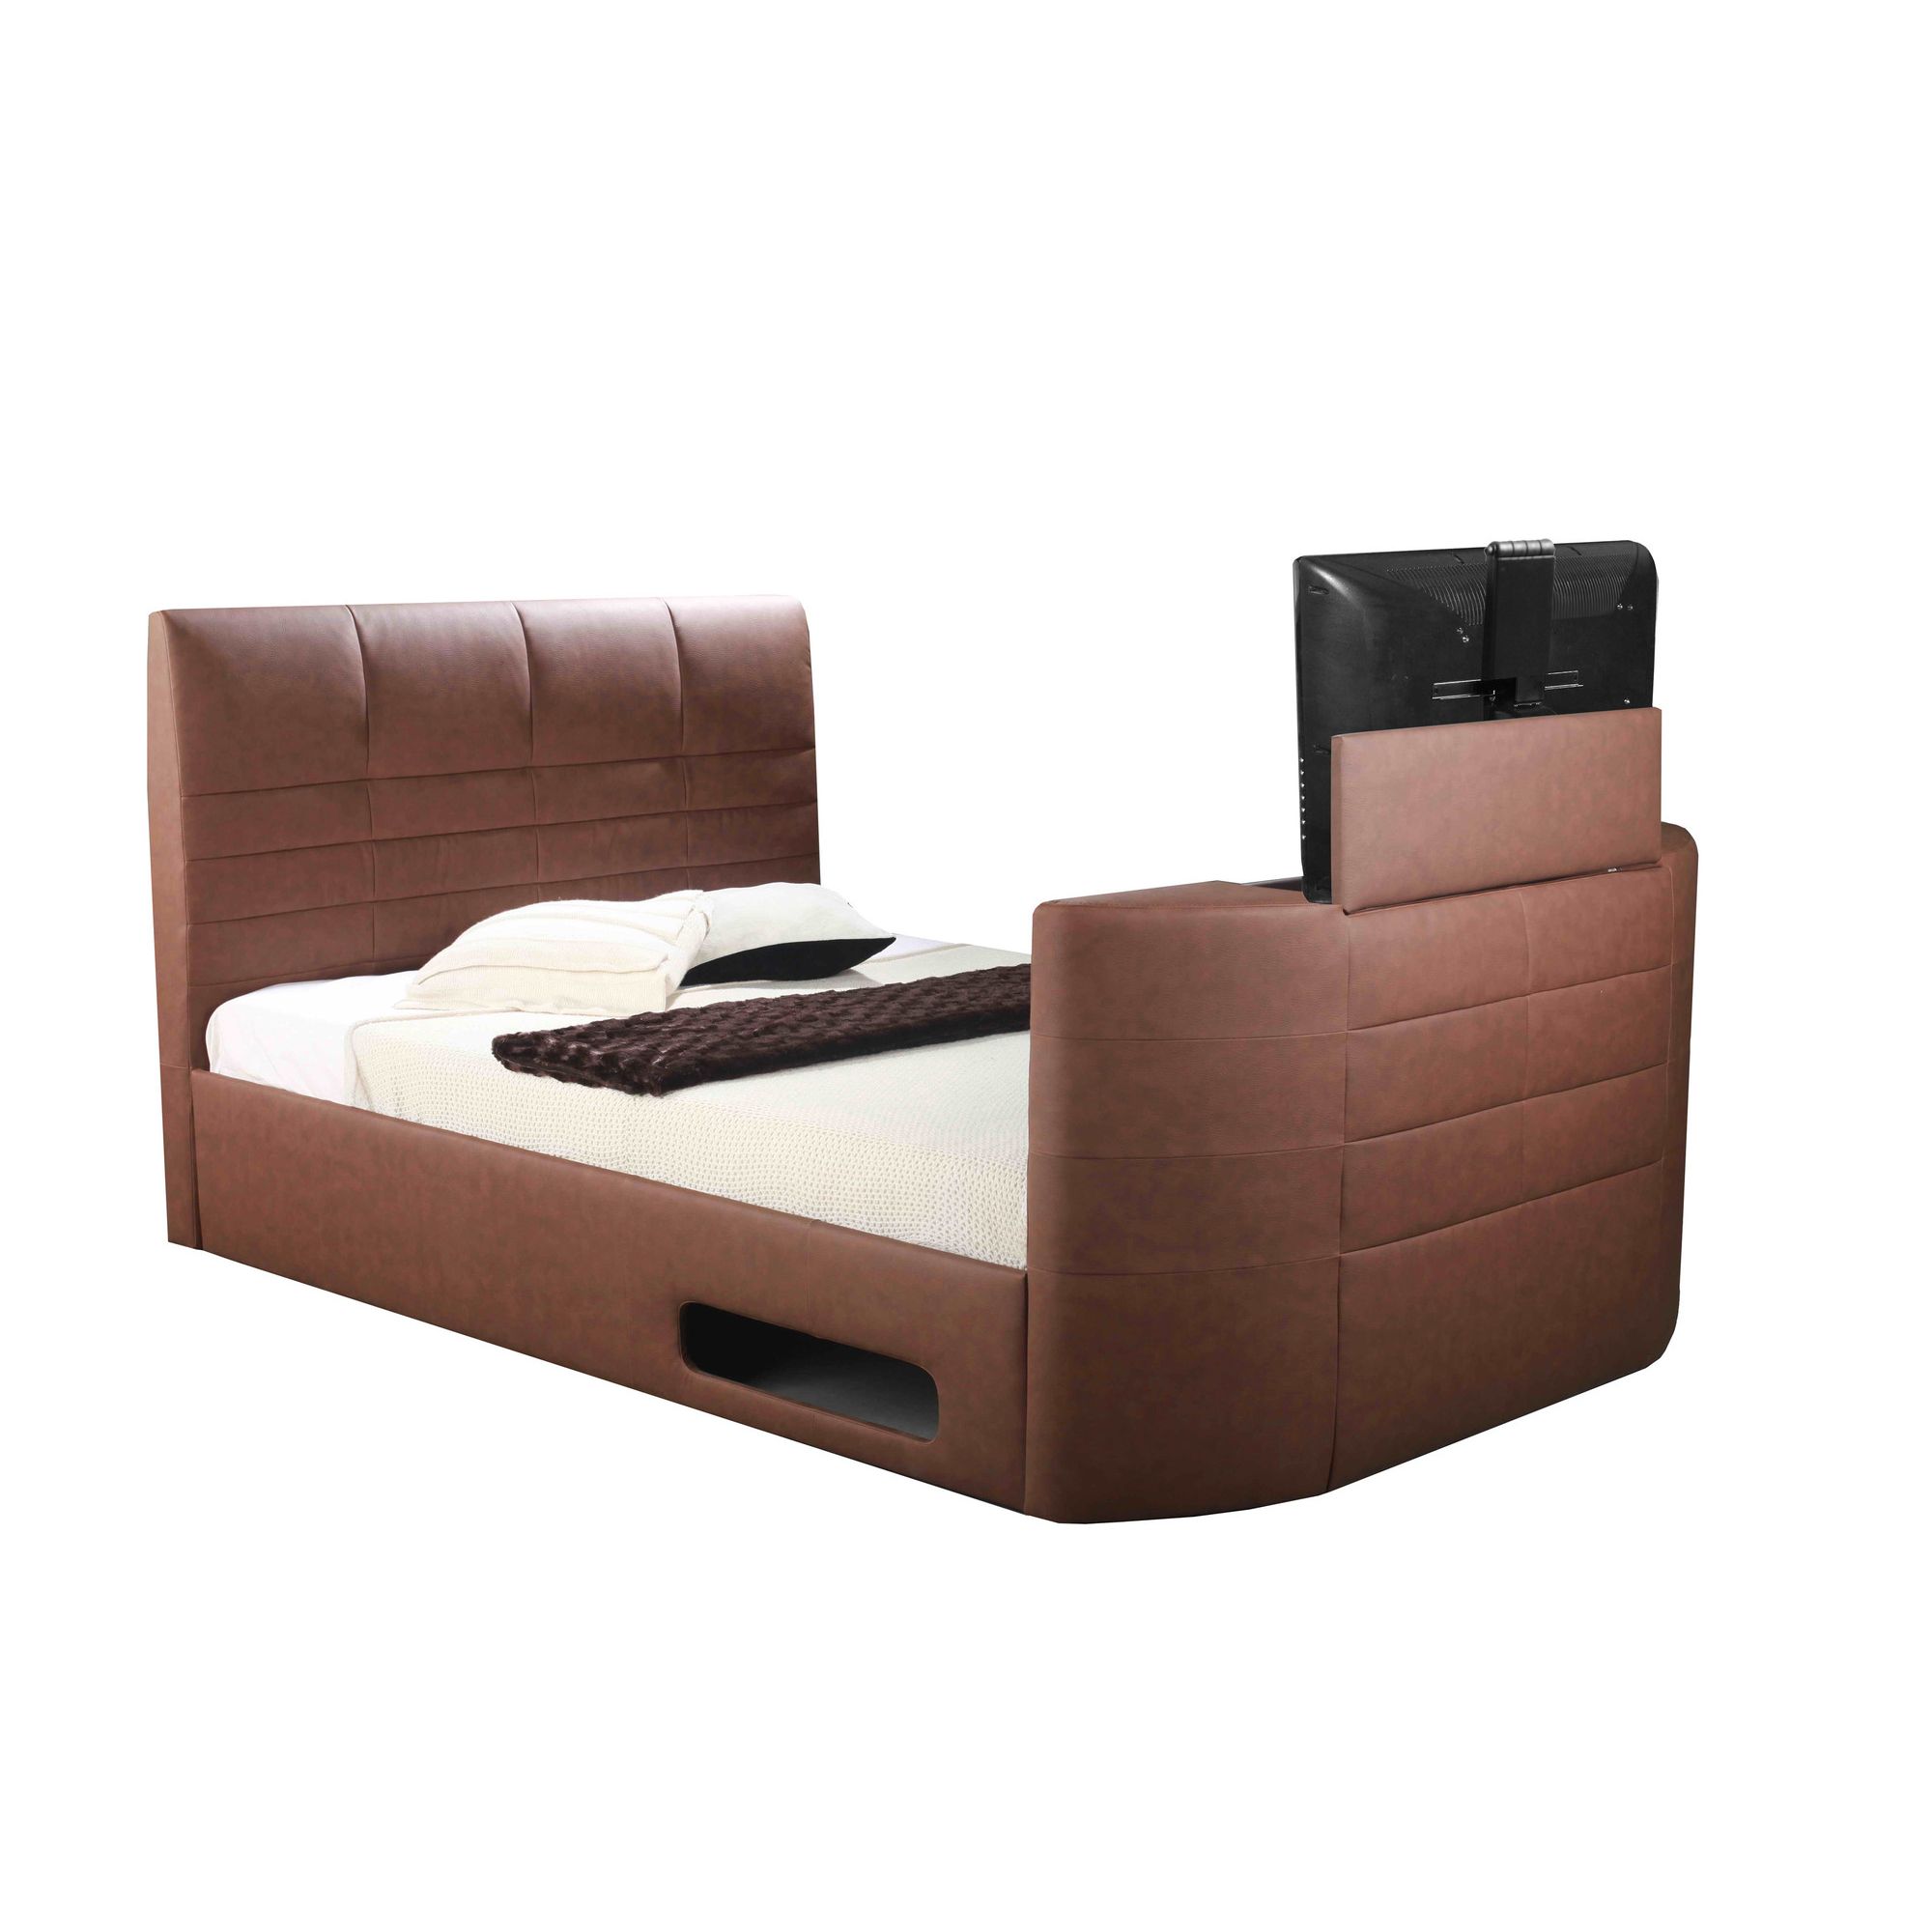 Altruna Miami Electric Wireless TV Bed - Double - Chocolate Brown - With Ottoman at Tesco Direct